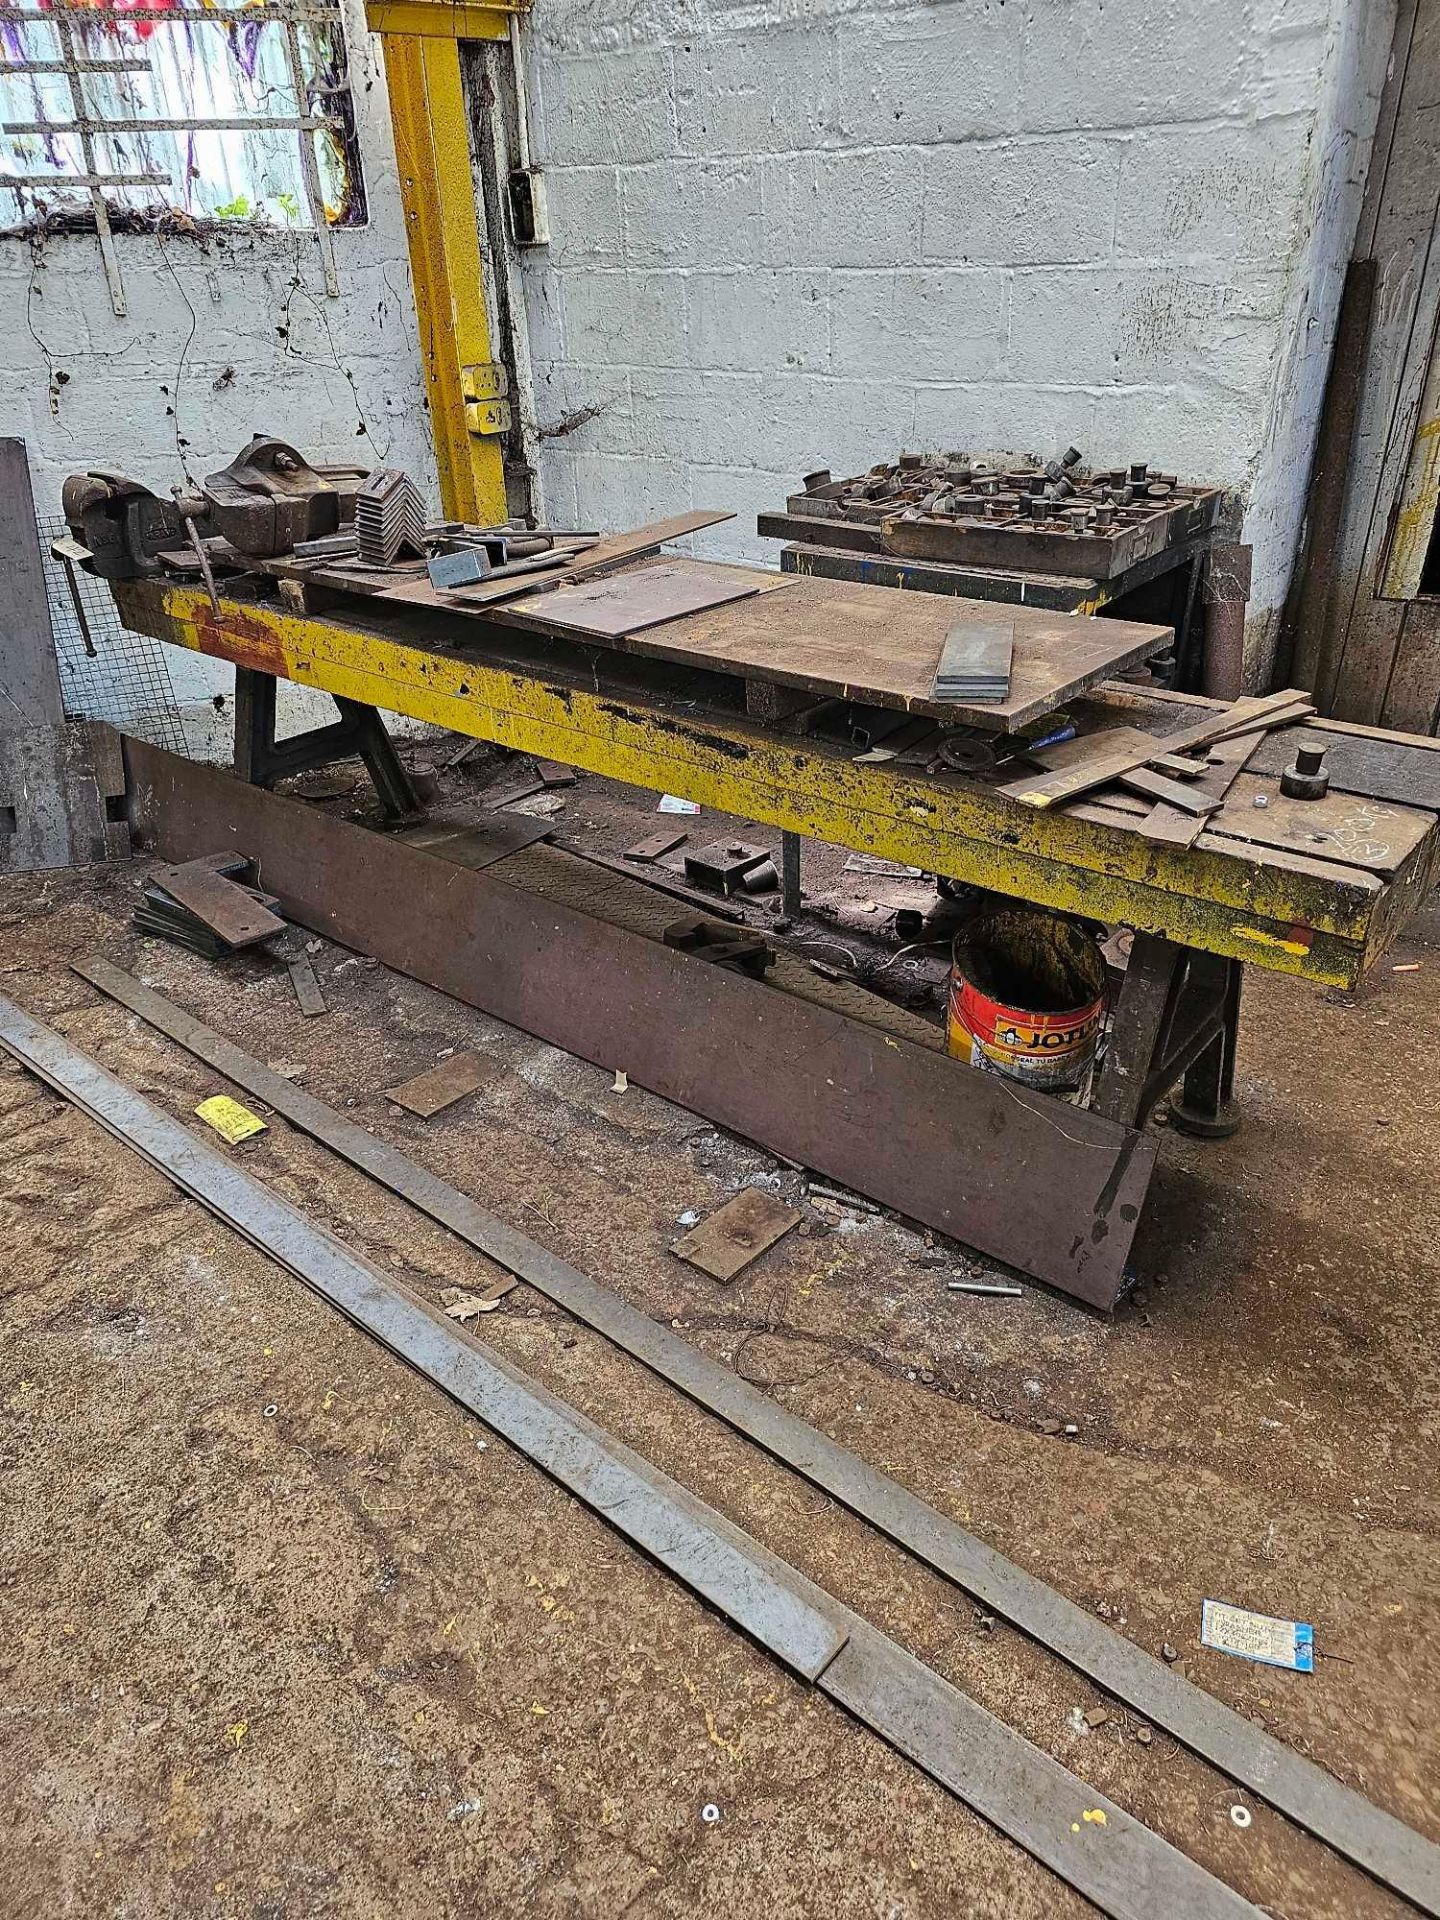 Cast Steel Engineers Marking Out Work Bench 306 x 56 x 83cm Weight 700kg Complete With 2 x Vices